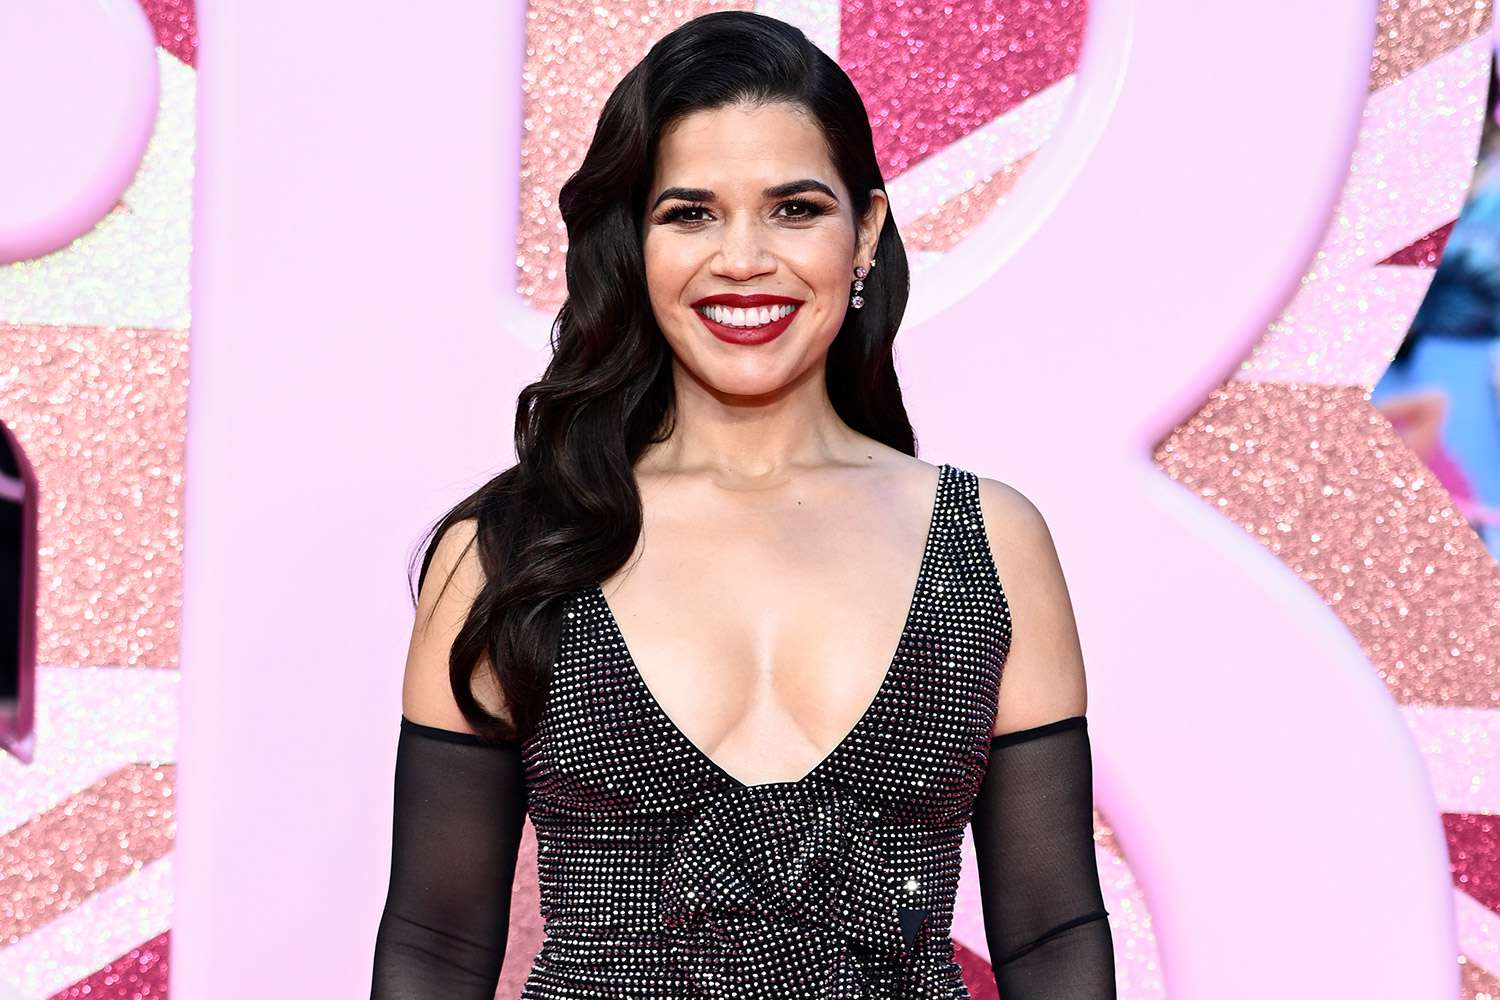 America Ferrera has been promoting body positivity in Hollywood